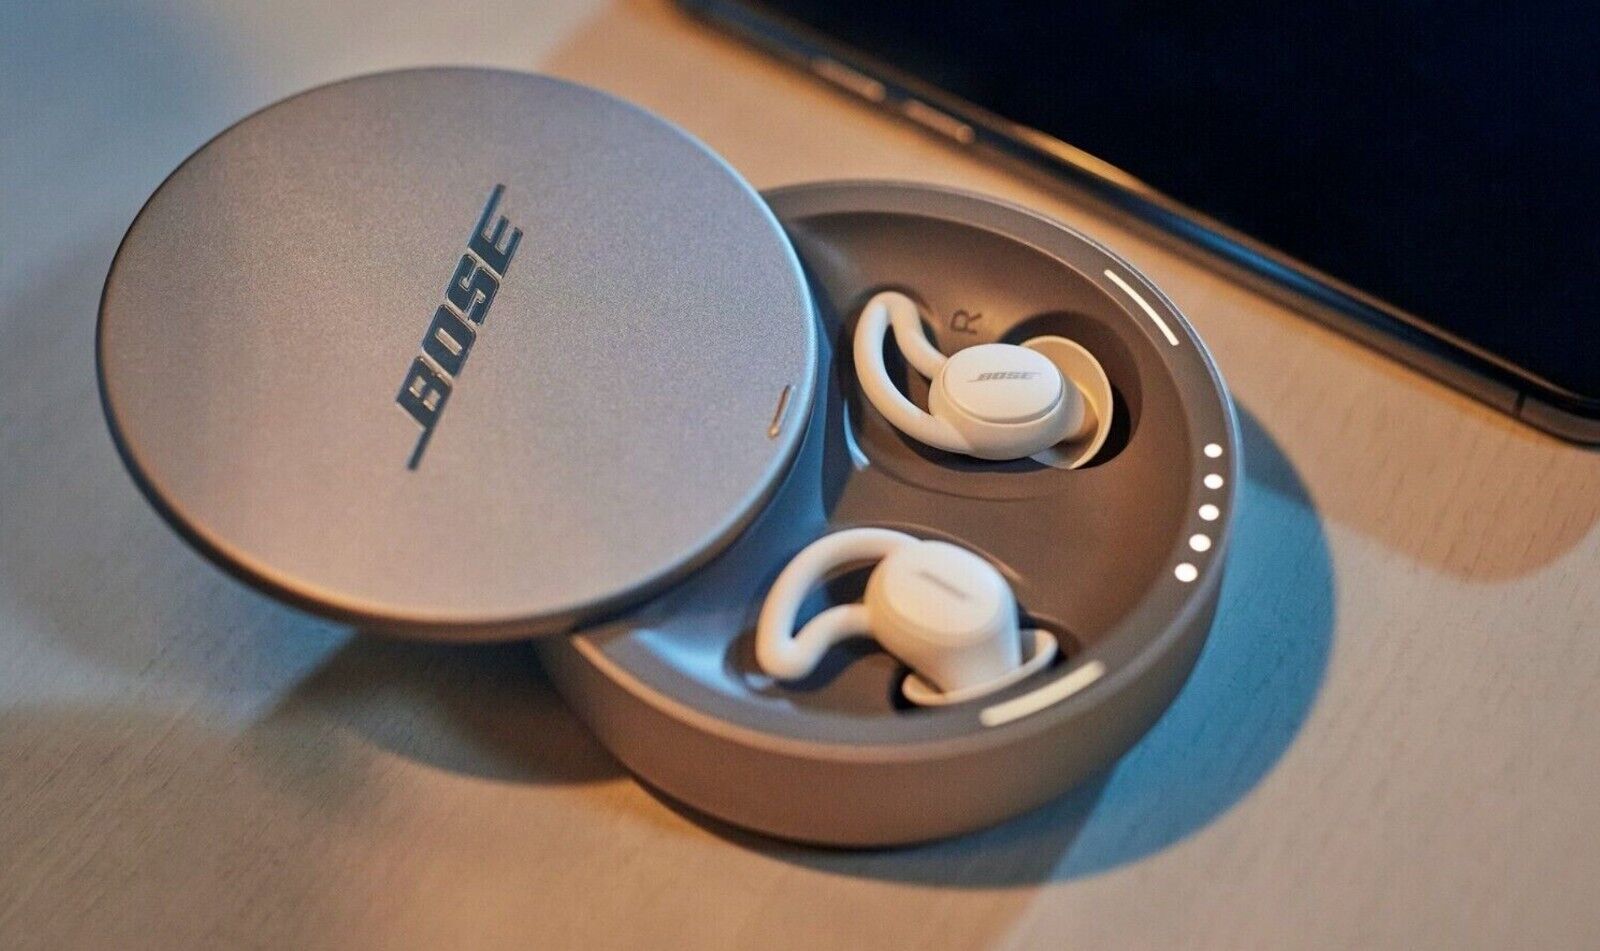 bose-sleepbuds-ii-unique-earbuds-reduce-distractions-and-improve-sleep-quality